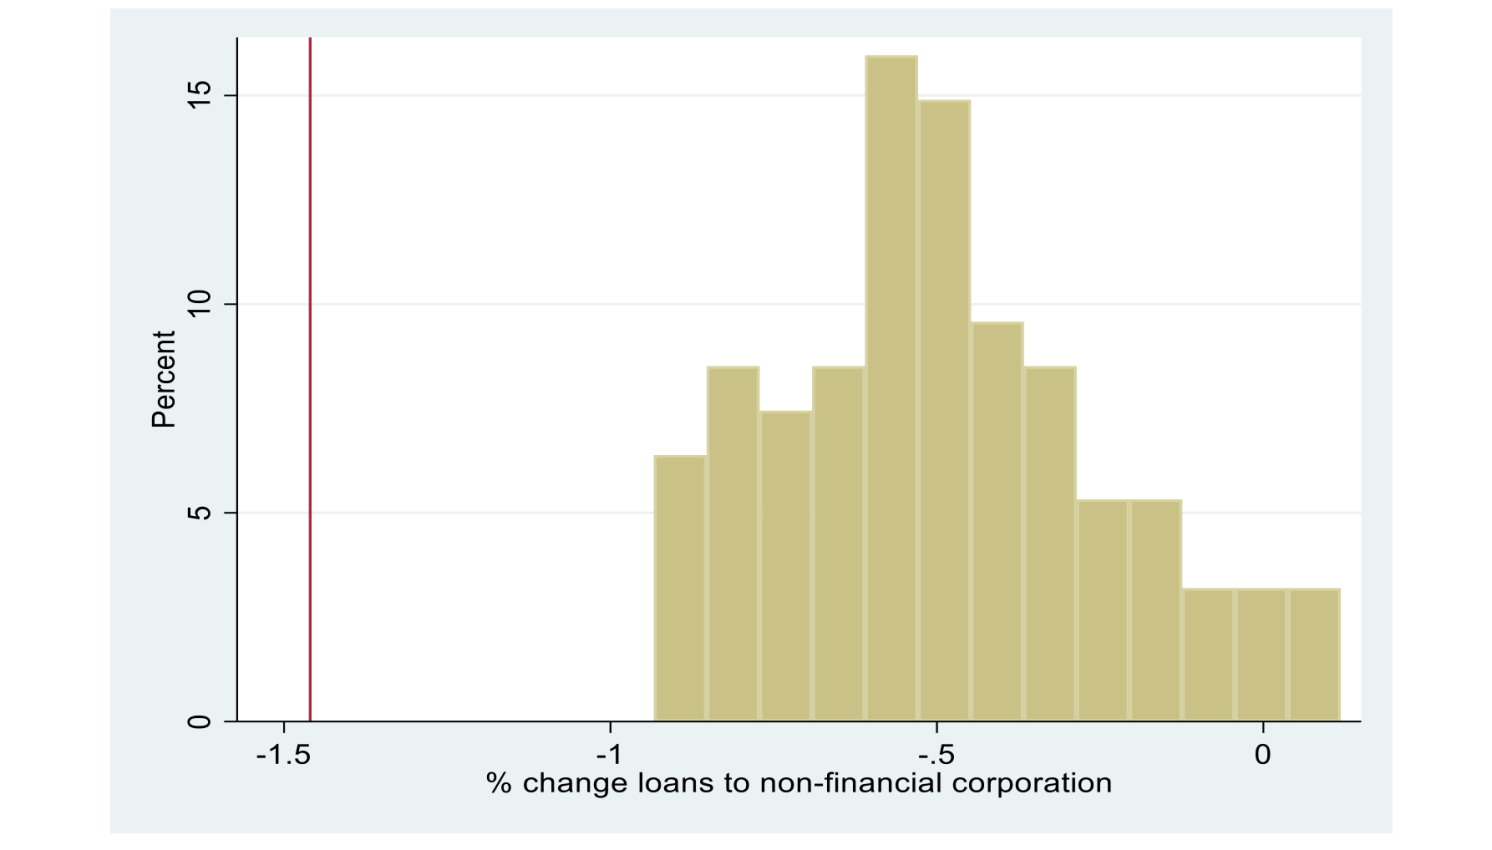 Figure 1 Total effects of a 1% policy rate hike on the percent change in loans to non-financial corporations